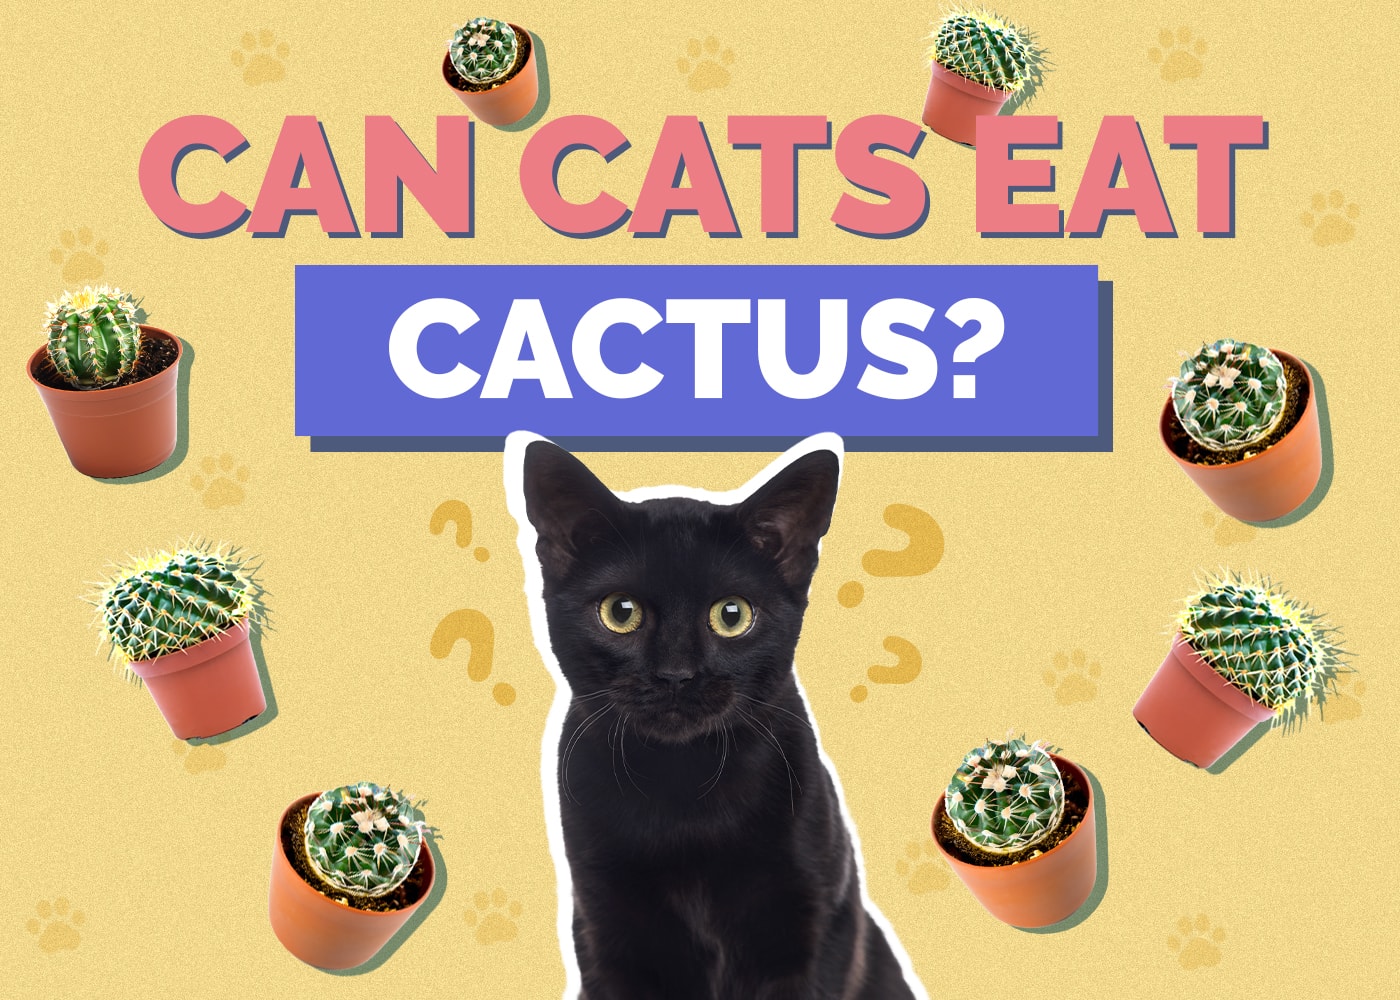 Can Cats Eat cactus